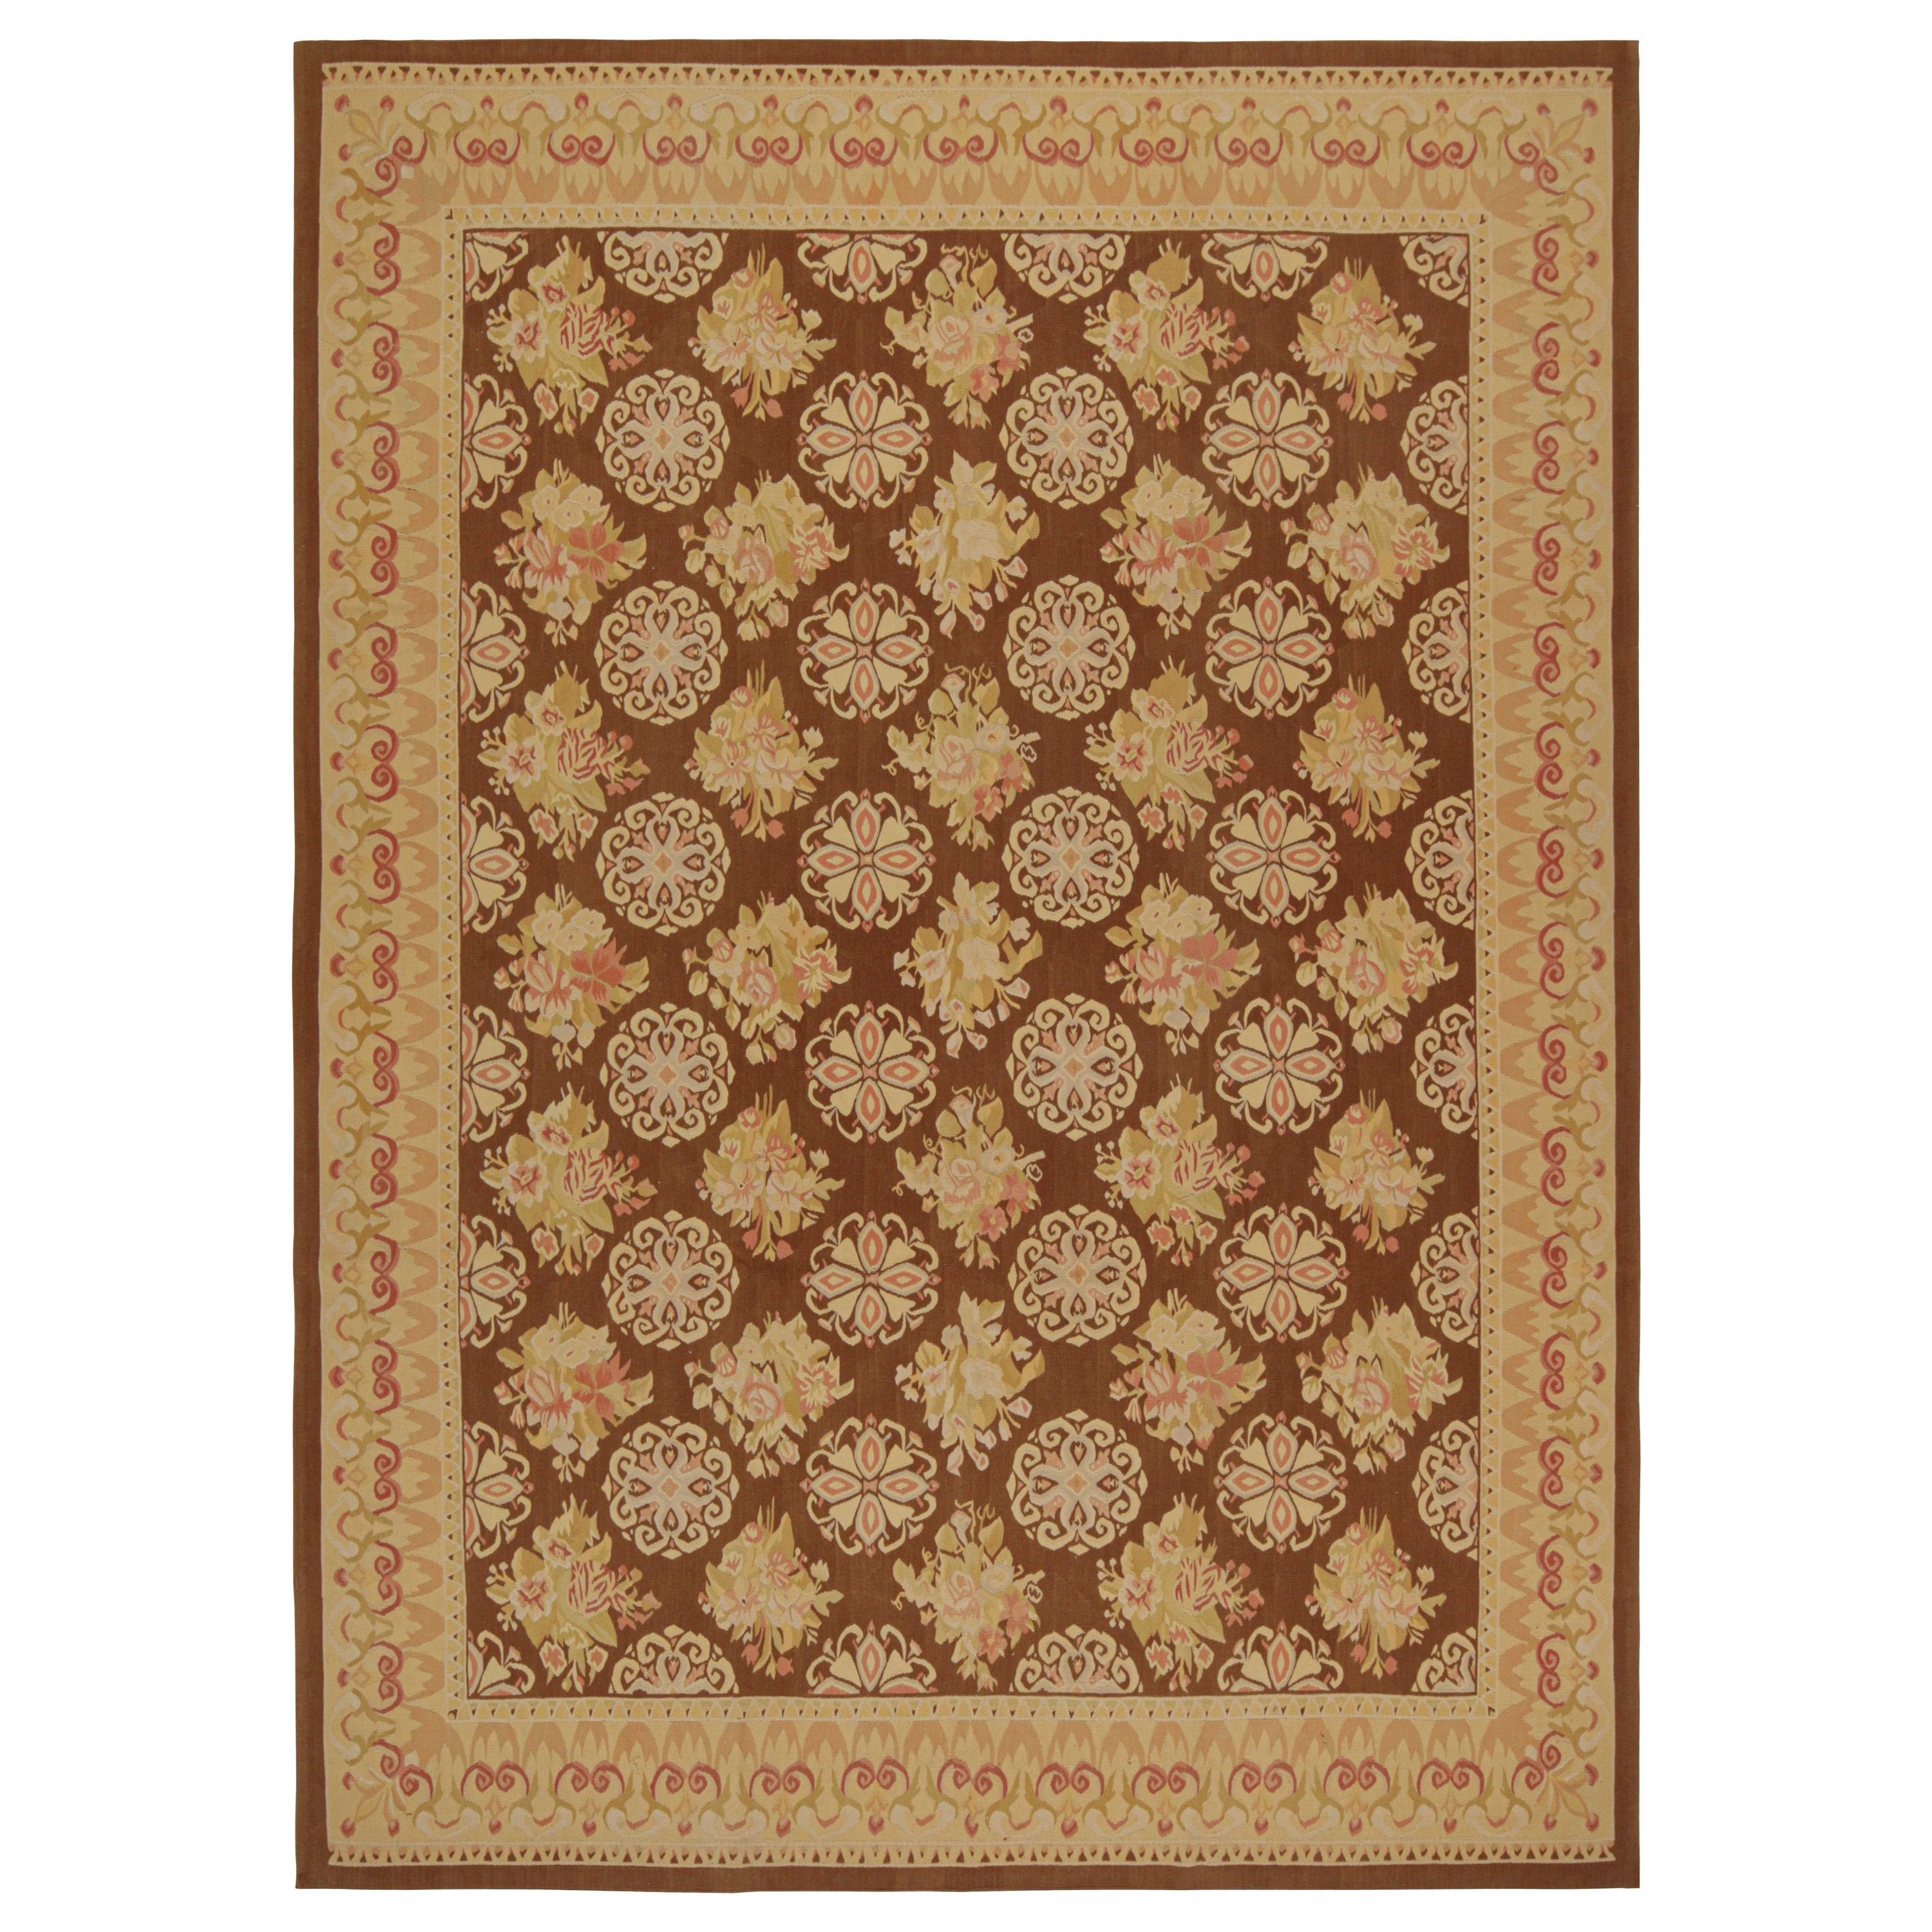 Rug & Kilim’s Aubusson Flatweave Style Rug in Brown with Beige Floral Patterns For Sale